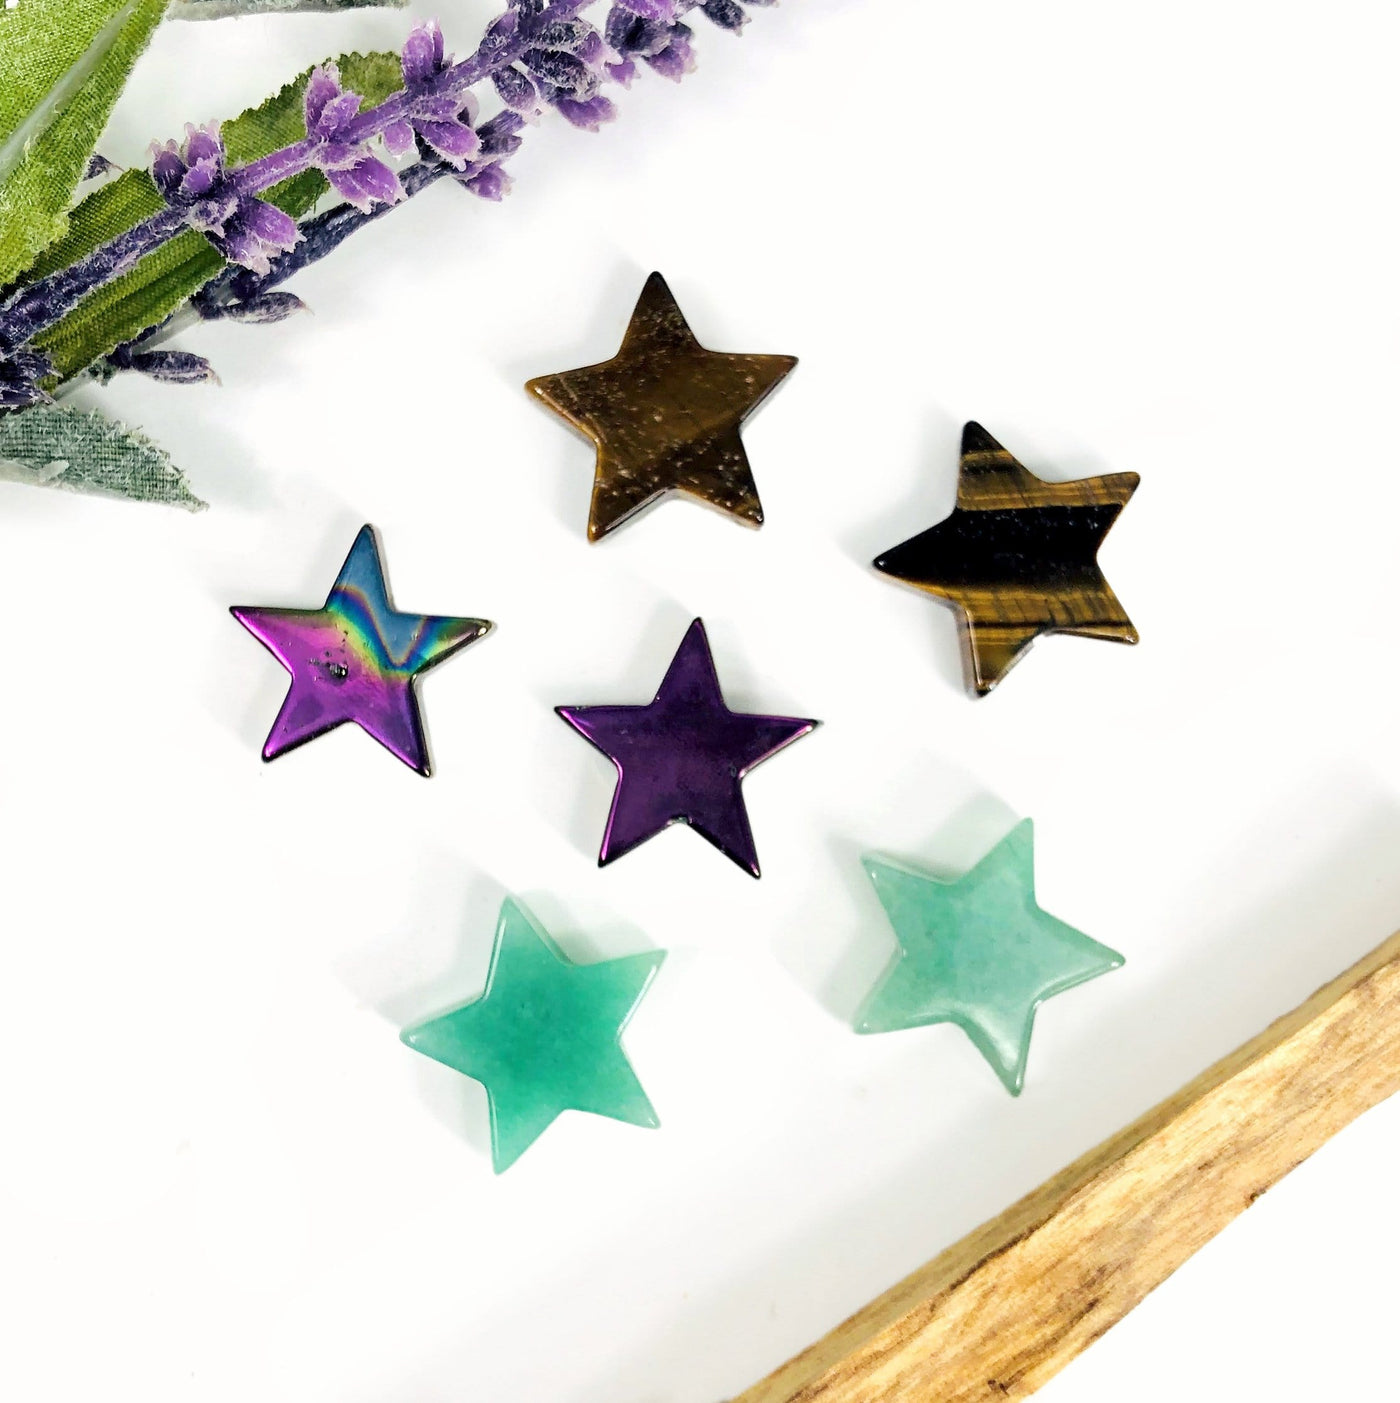 6 different Star Gemstone Cabochons displayed on white surface